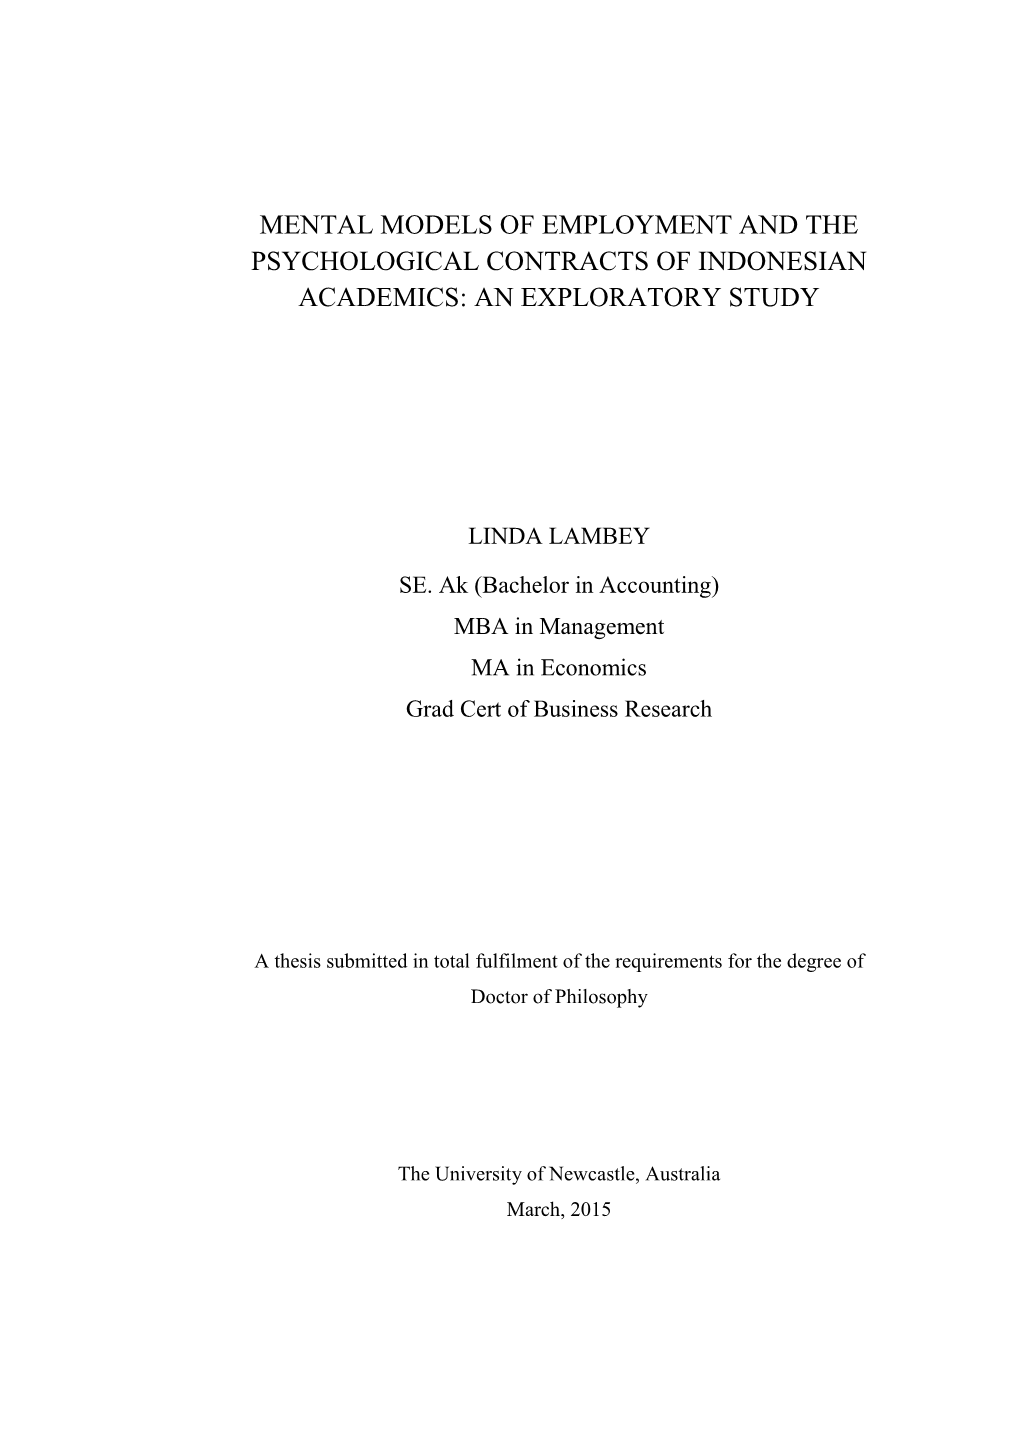 Mental Models of Employment and the Psychological Contracts of Indonesian Academics: an Exploratory Study